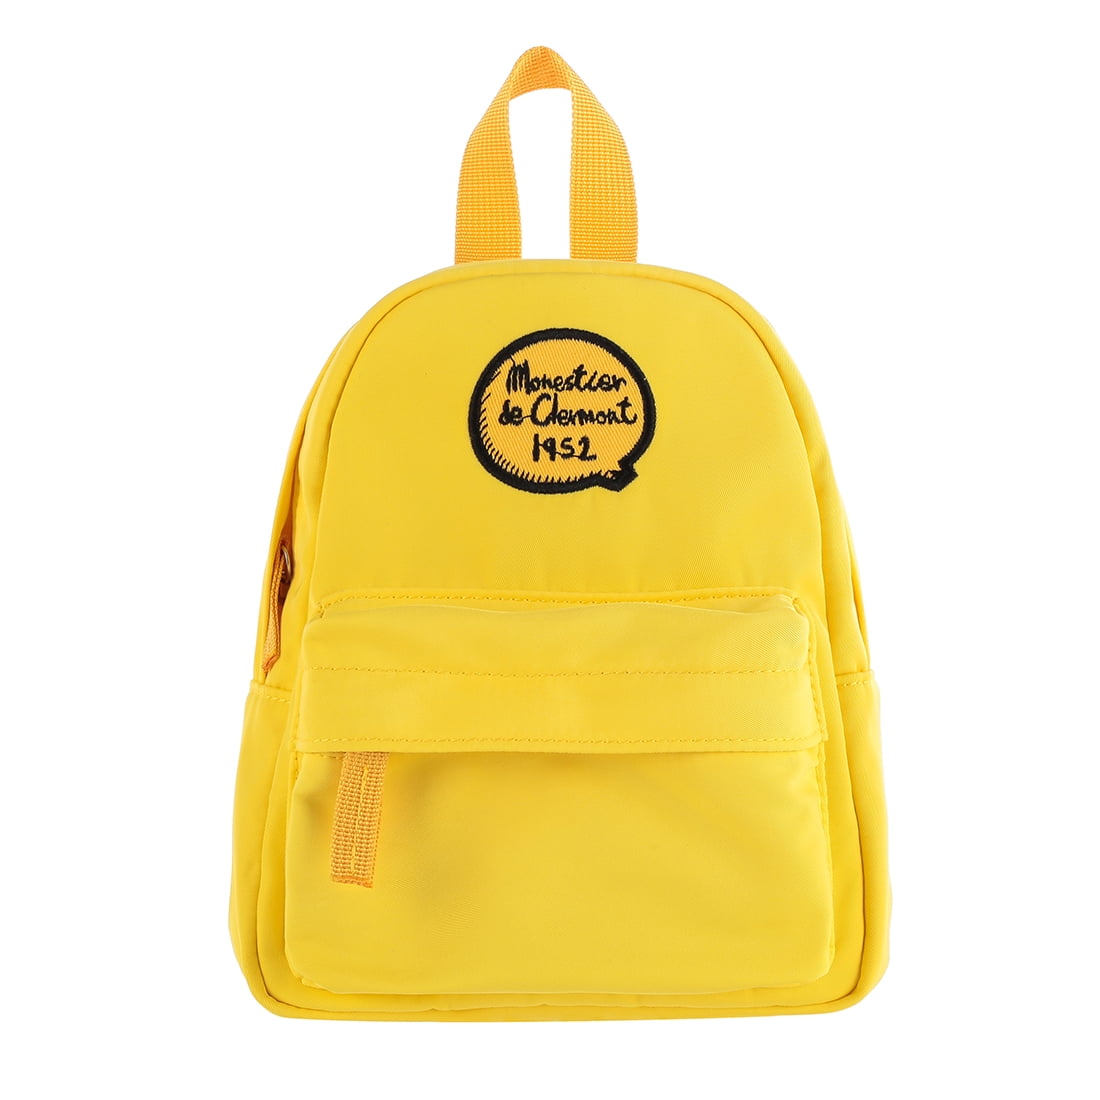 Miniso Mini Backpack Casual Lightweight School Bag Travel Daypack for Kids, Yellow, Kids Unisex, Size: 6